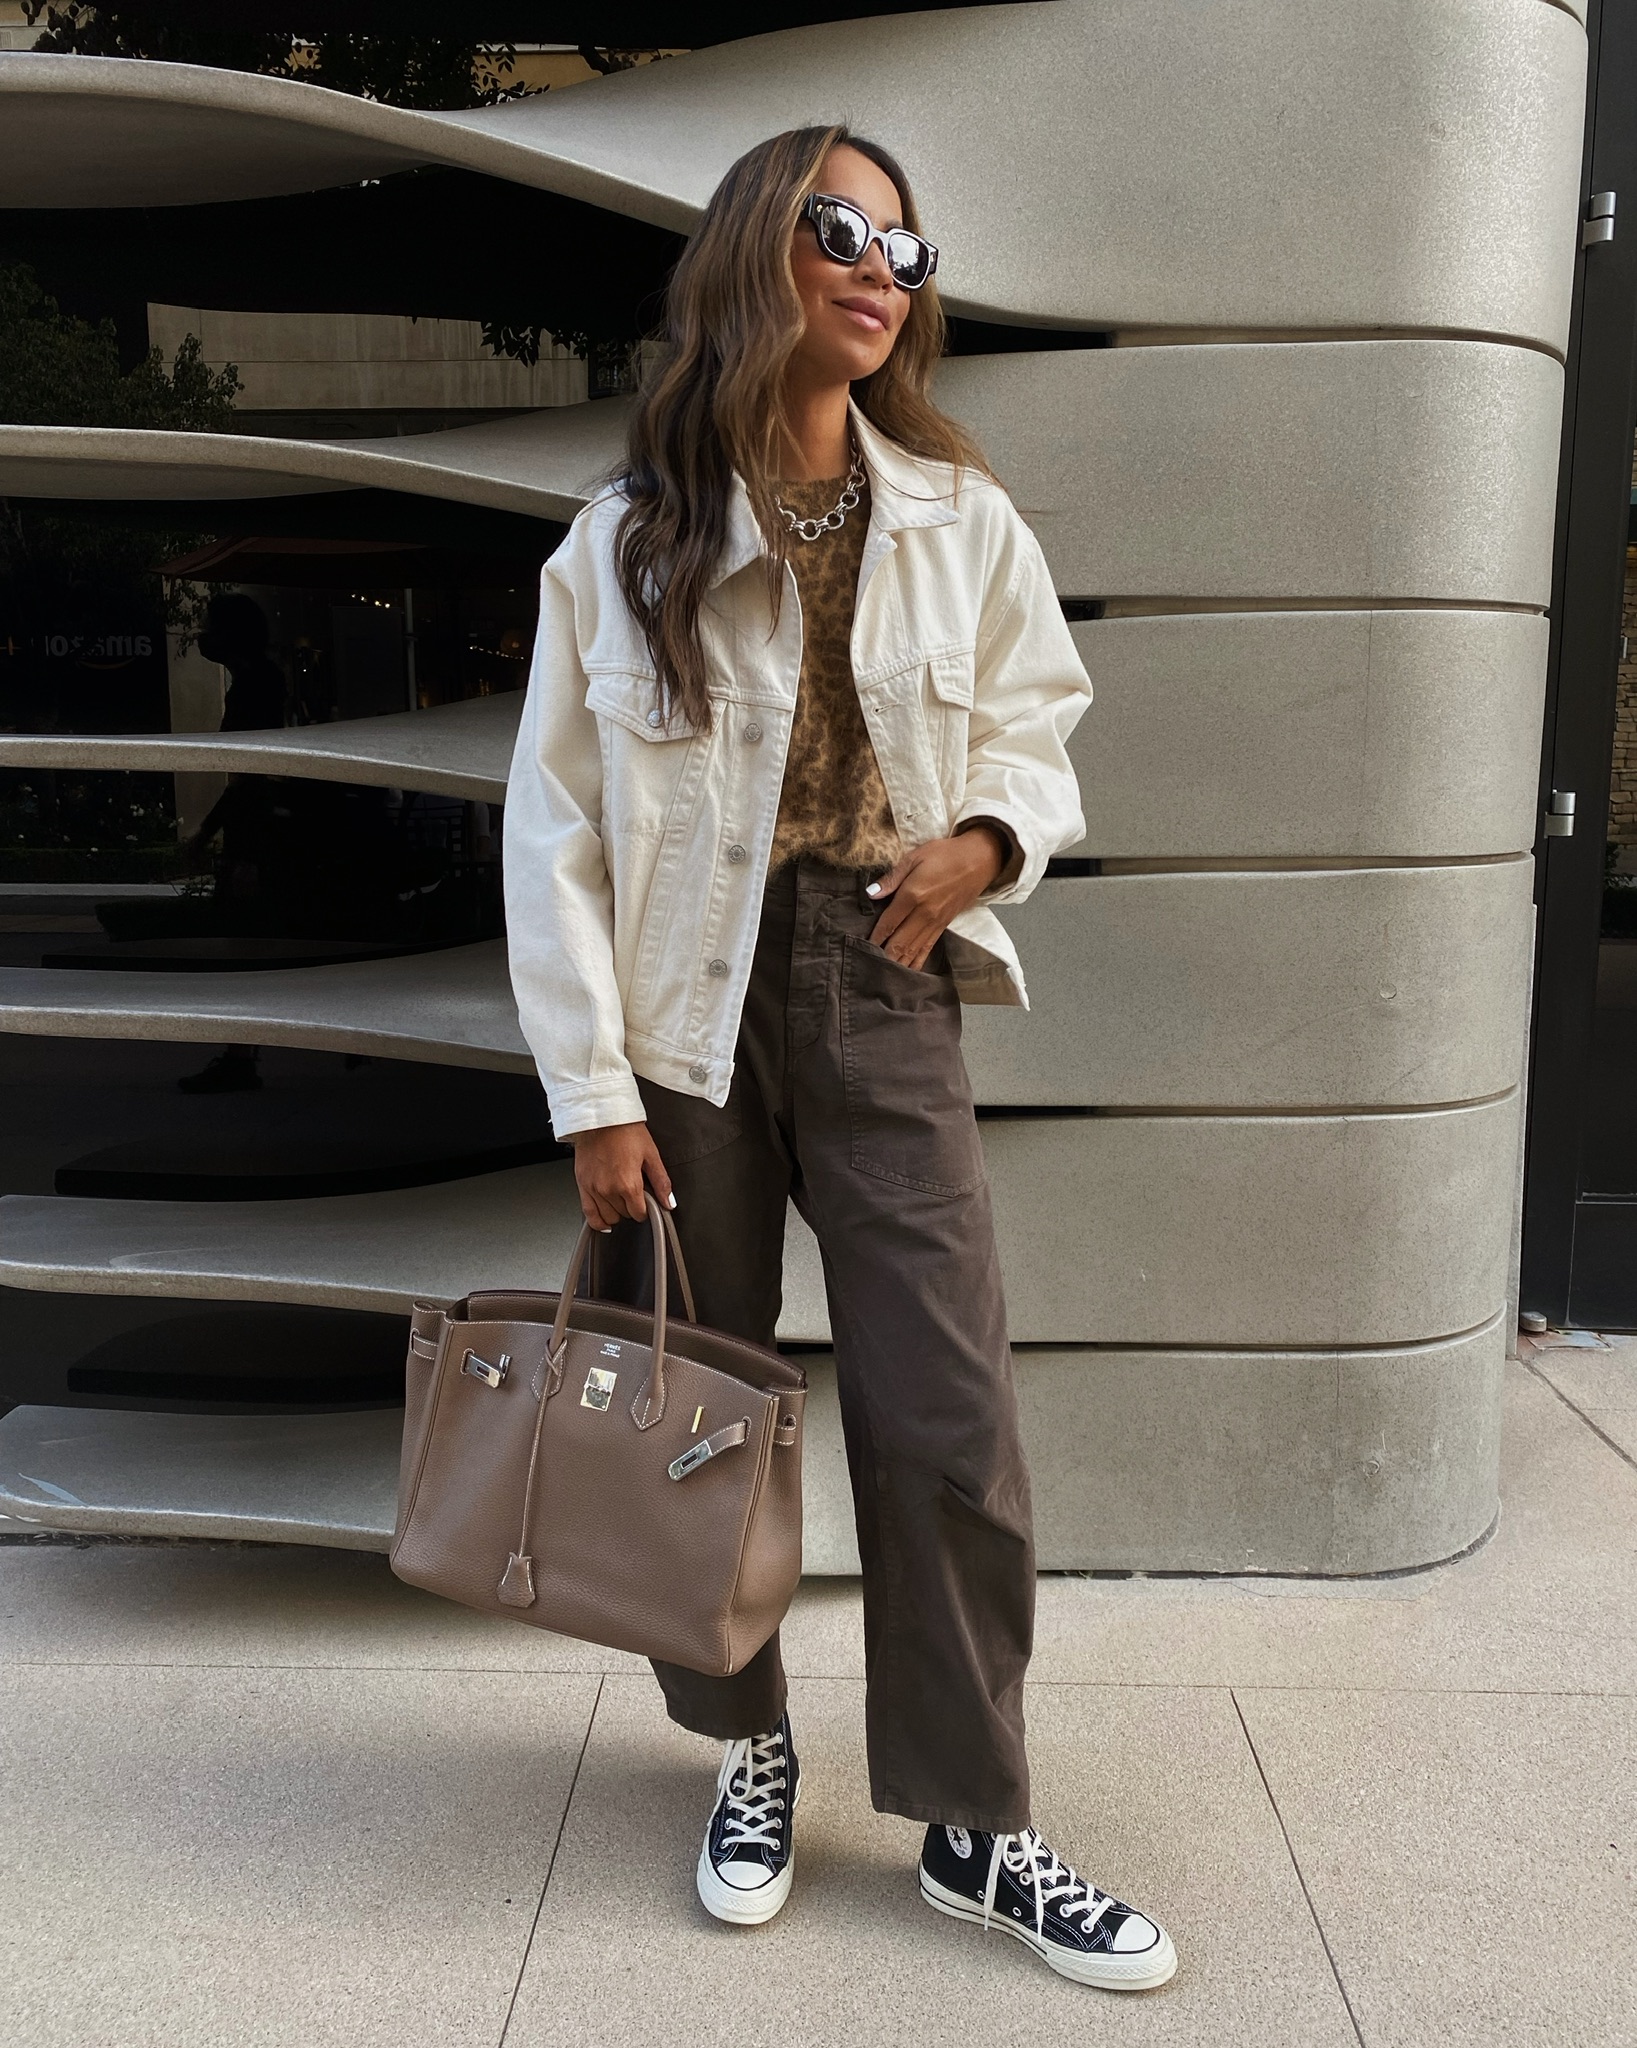 Weekend uniform. #WGACALV @sincerelyjules with our Louis Vuitton